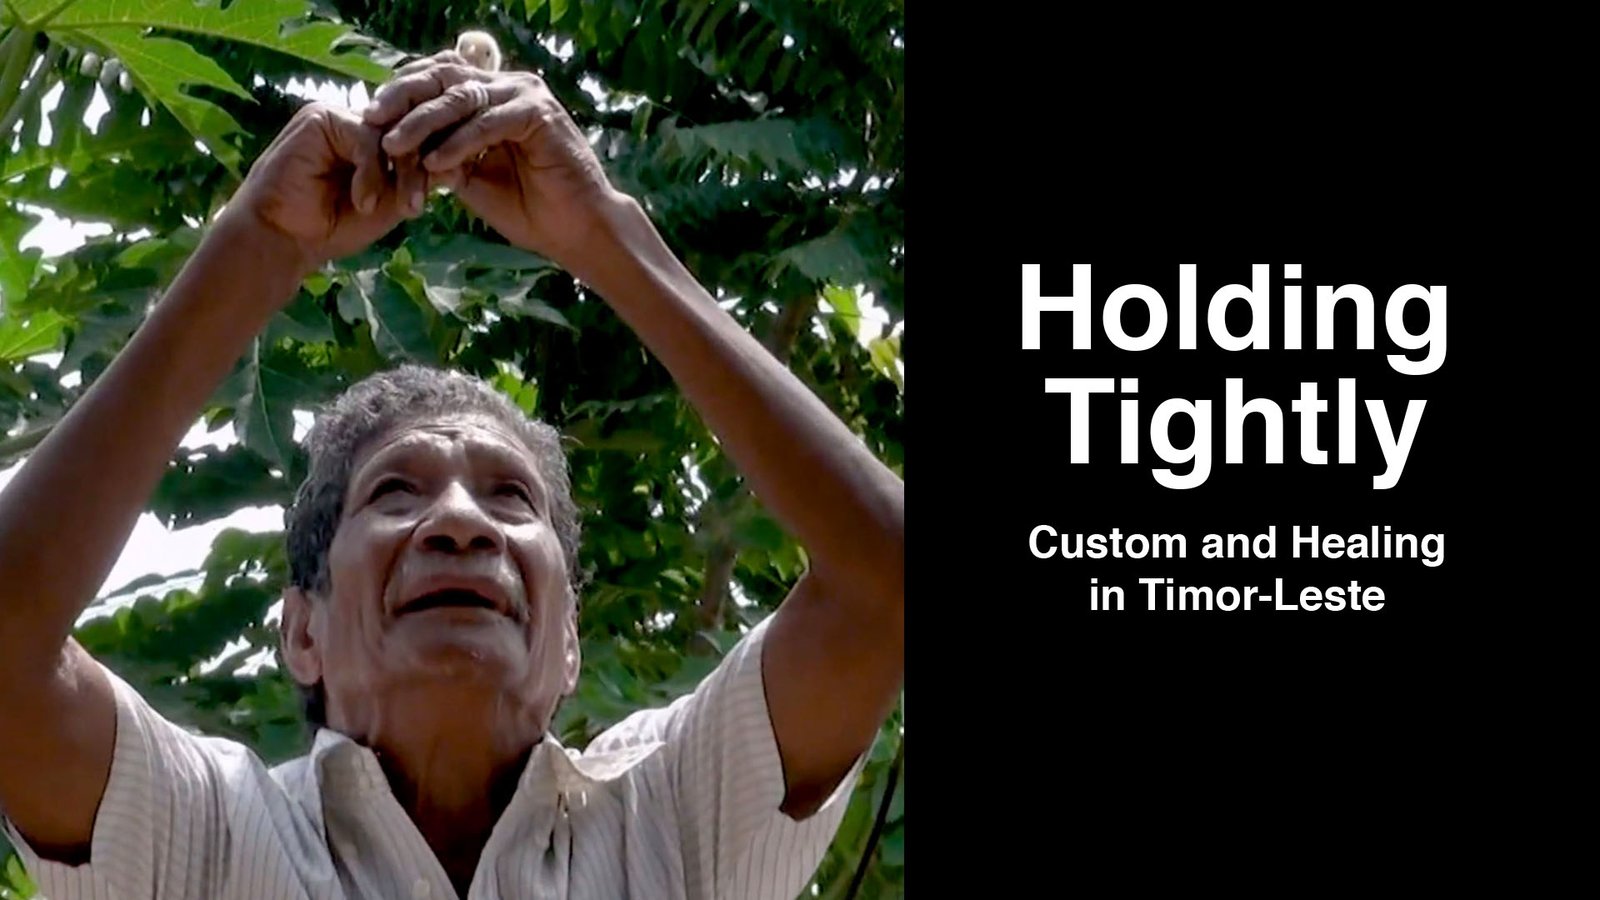 Holding Tightly: Custom and Healing in Timor-Leste